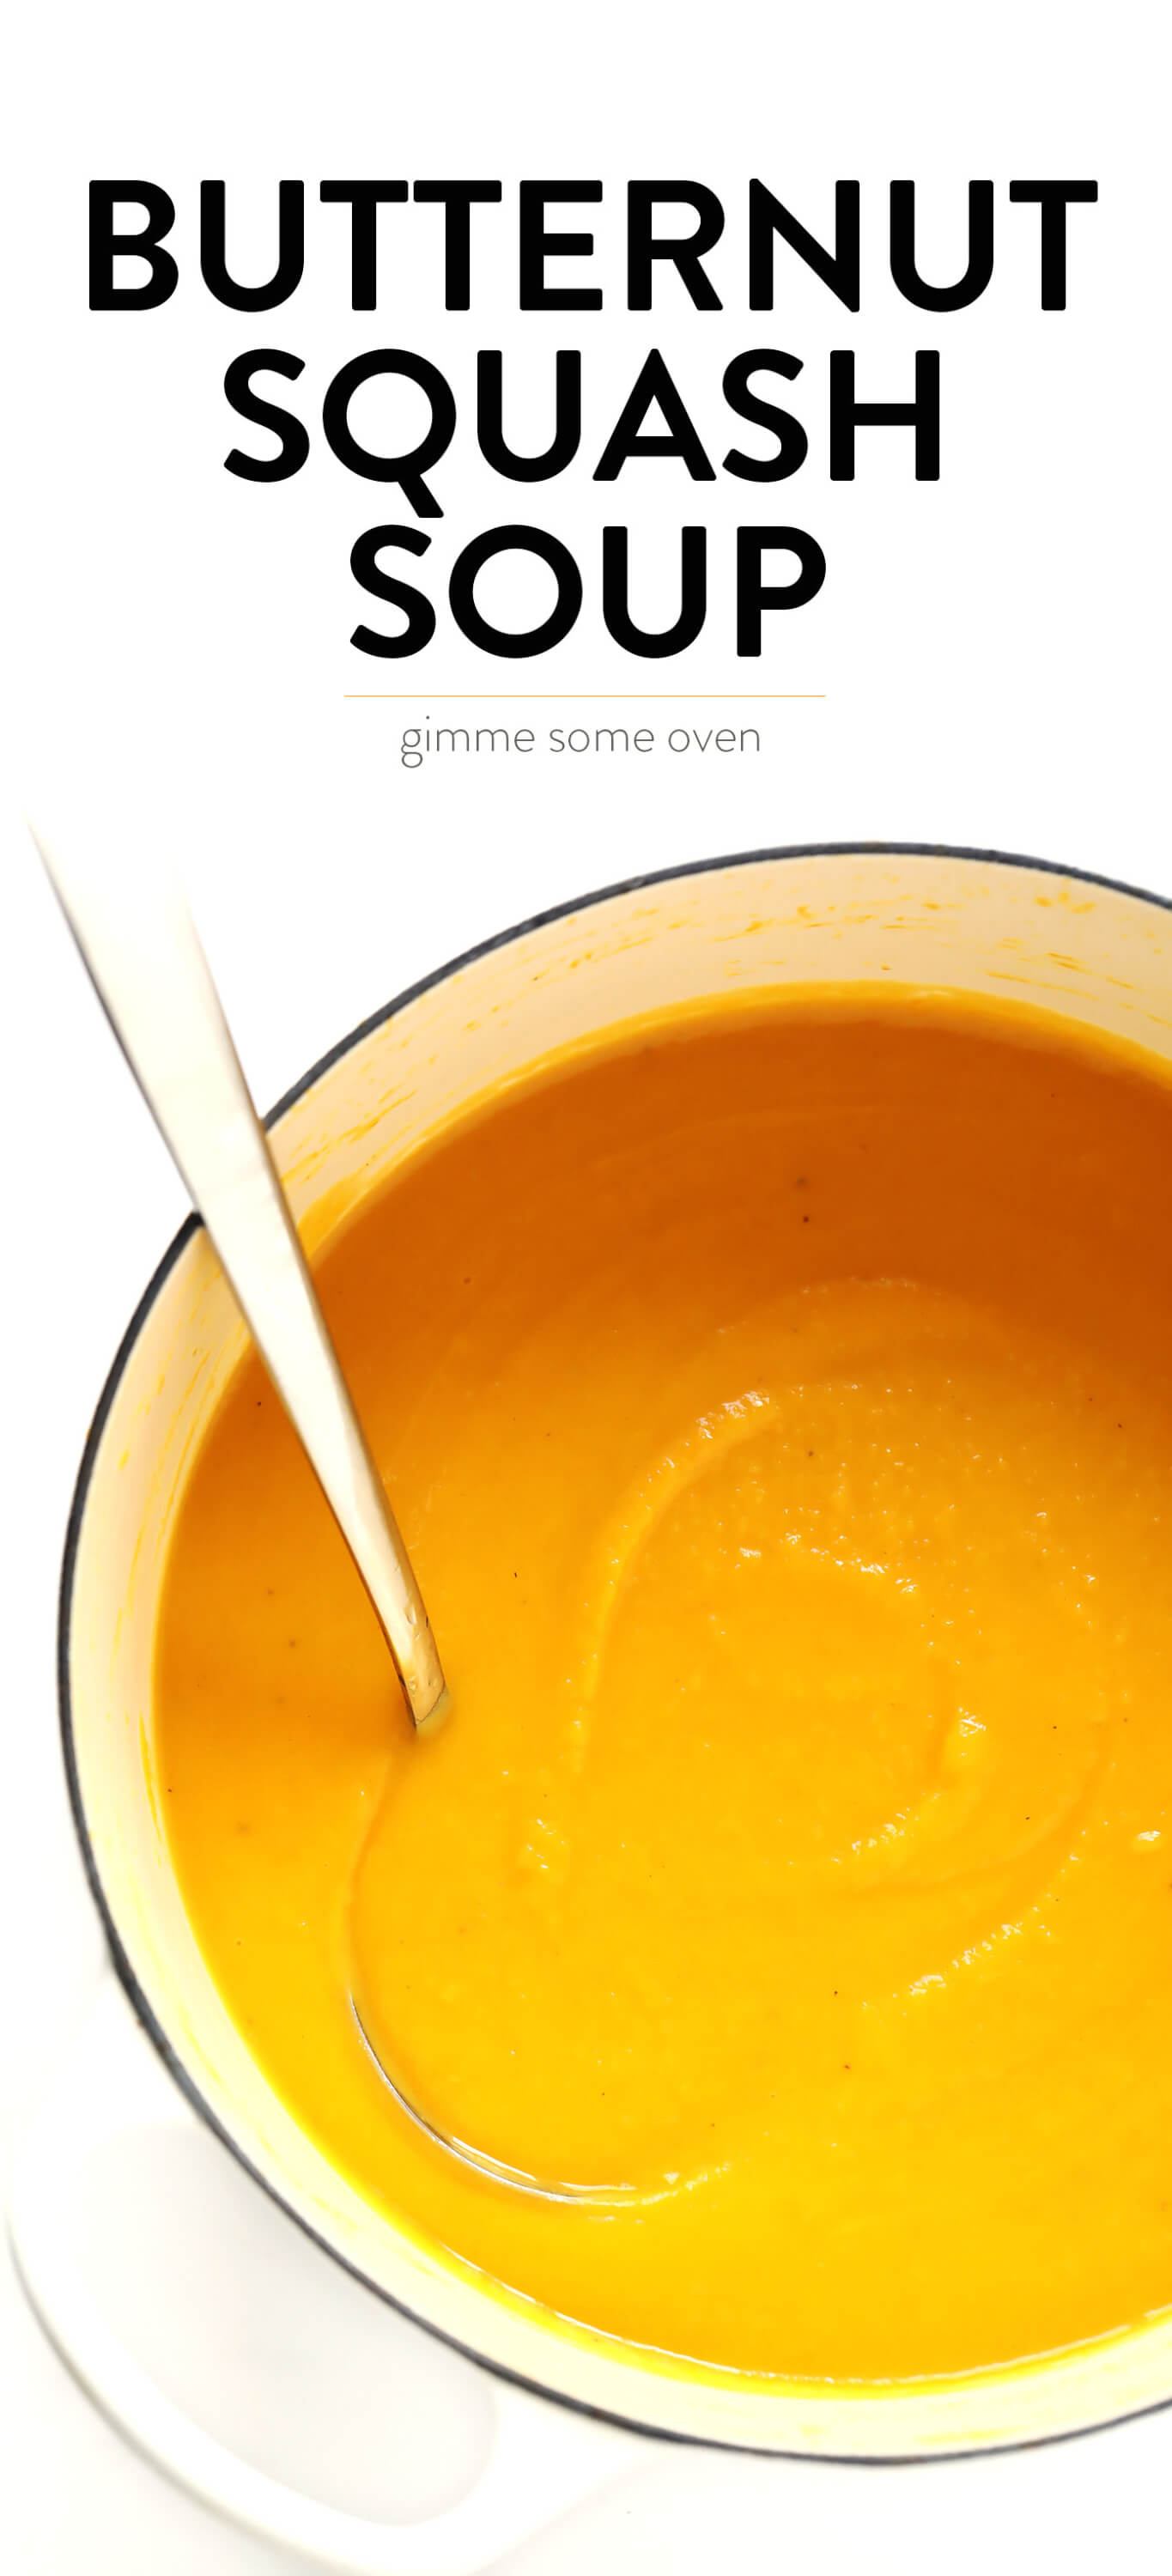 Butternut Squash Soup Recipe from Gimme Some Oven